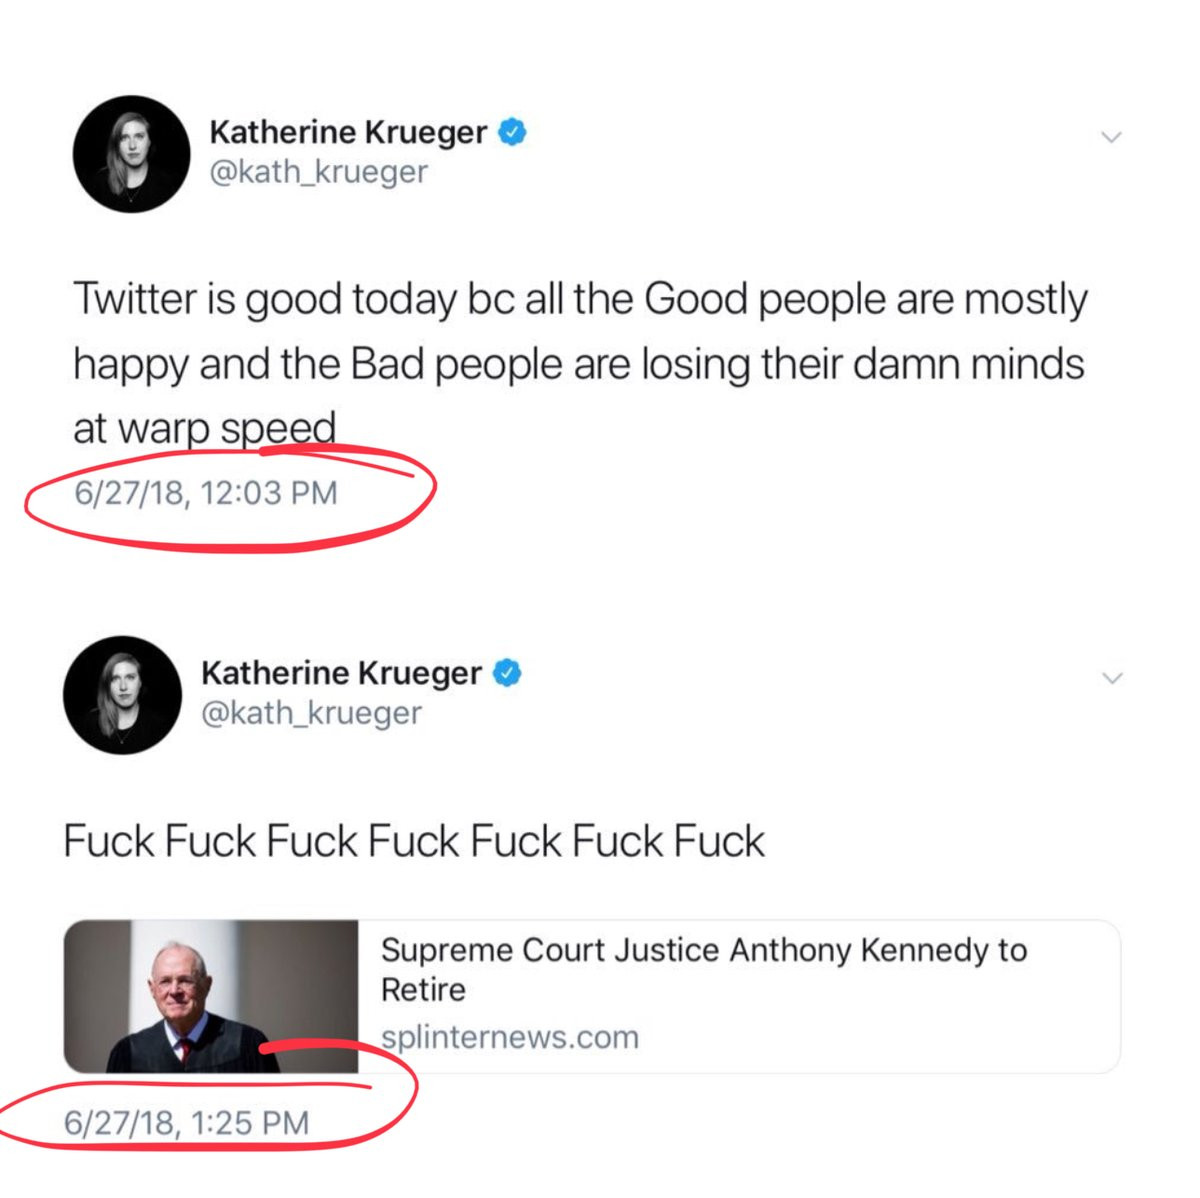 diagram - Katherine Krueger Twitter is good today bc all the Good people are mostly happy and the Bad people are losing their damn minds at warp speed 62718, Katherine Krueger Fuck Fuck Fuck Fuck Fuck Fuck Fuck Supreme Court Justice Anthony Kennedy to Ret